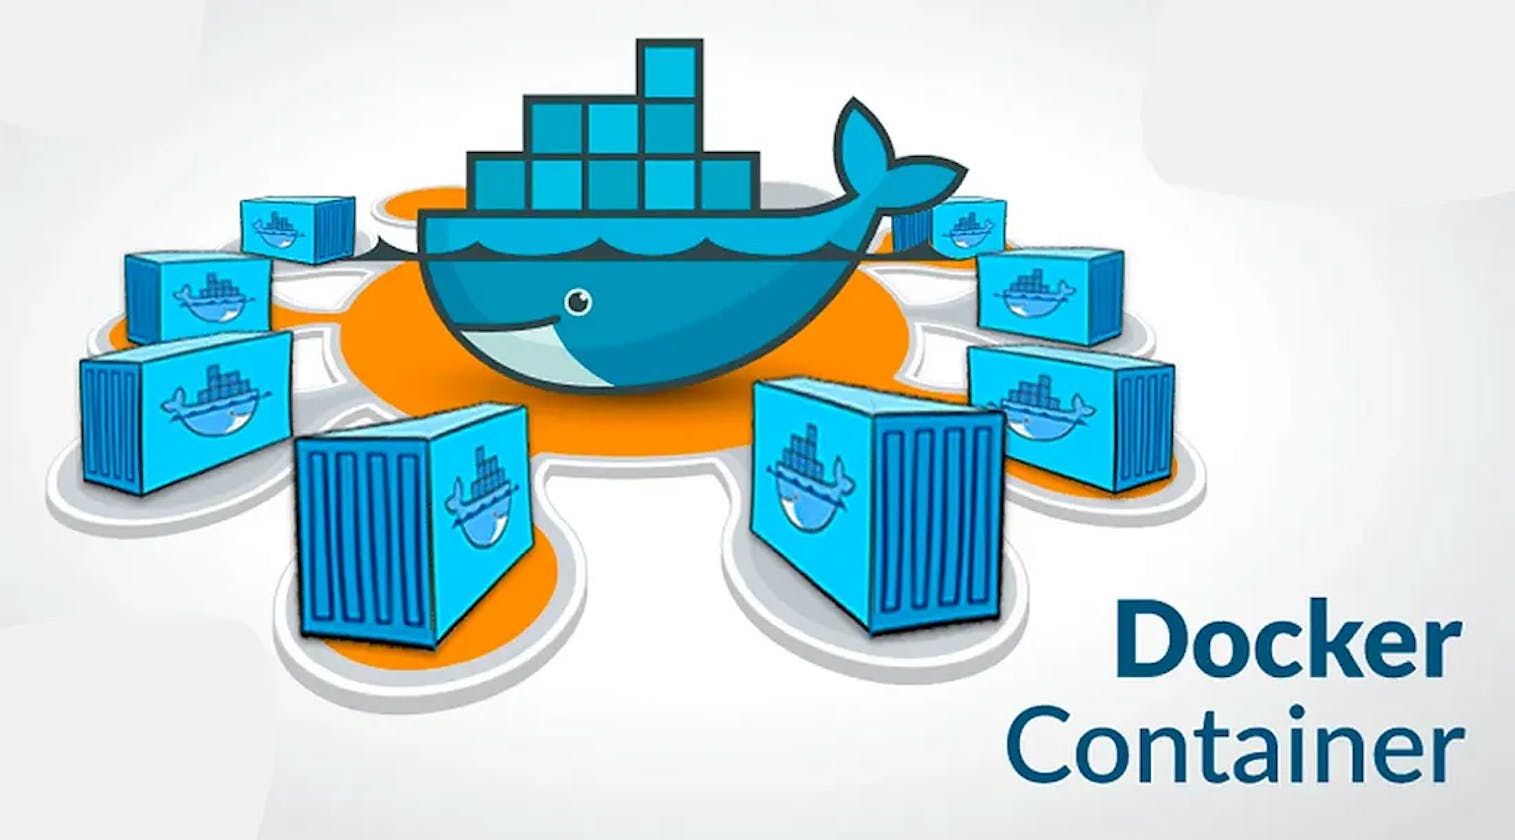 Creation of Image and container using Docker